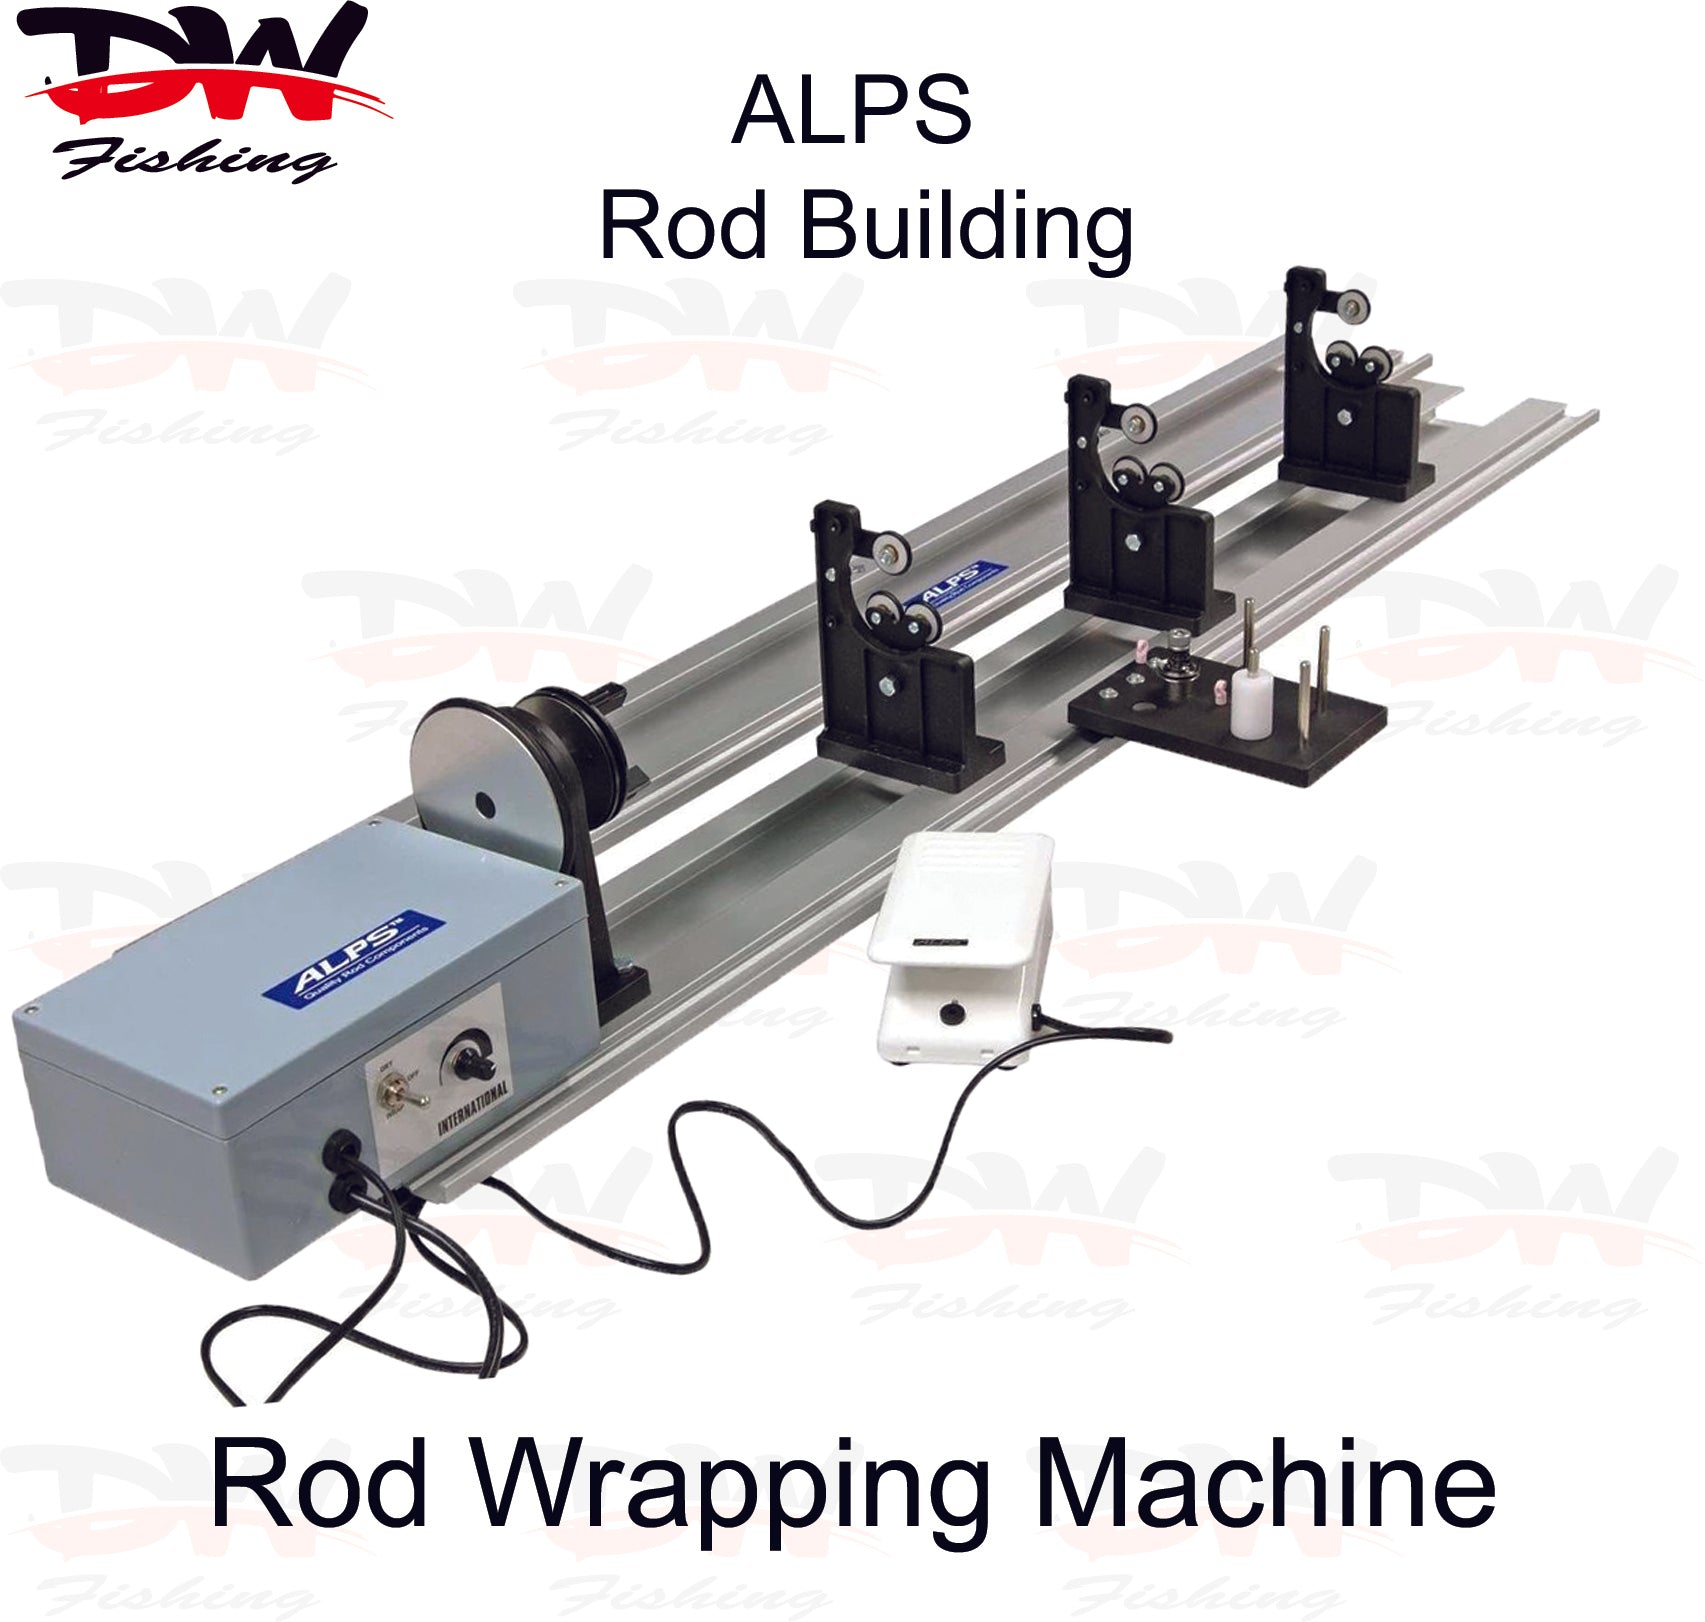 ALPS Rod Support Stand Top Wheel and Spring Assembly - RWM TW